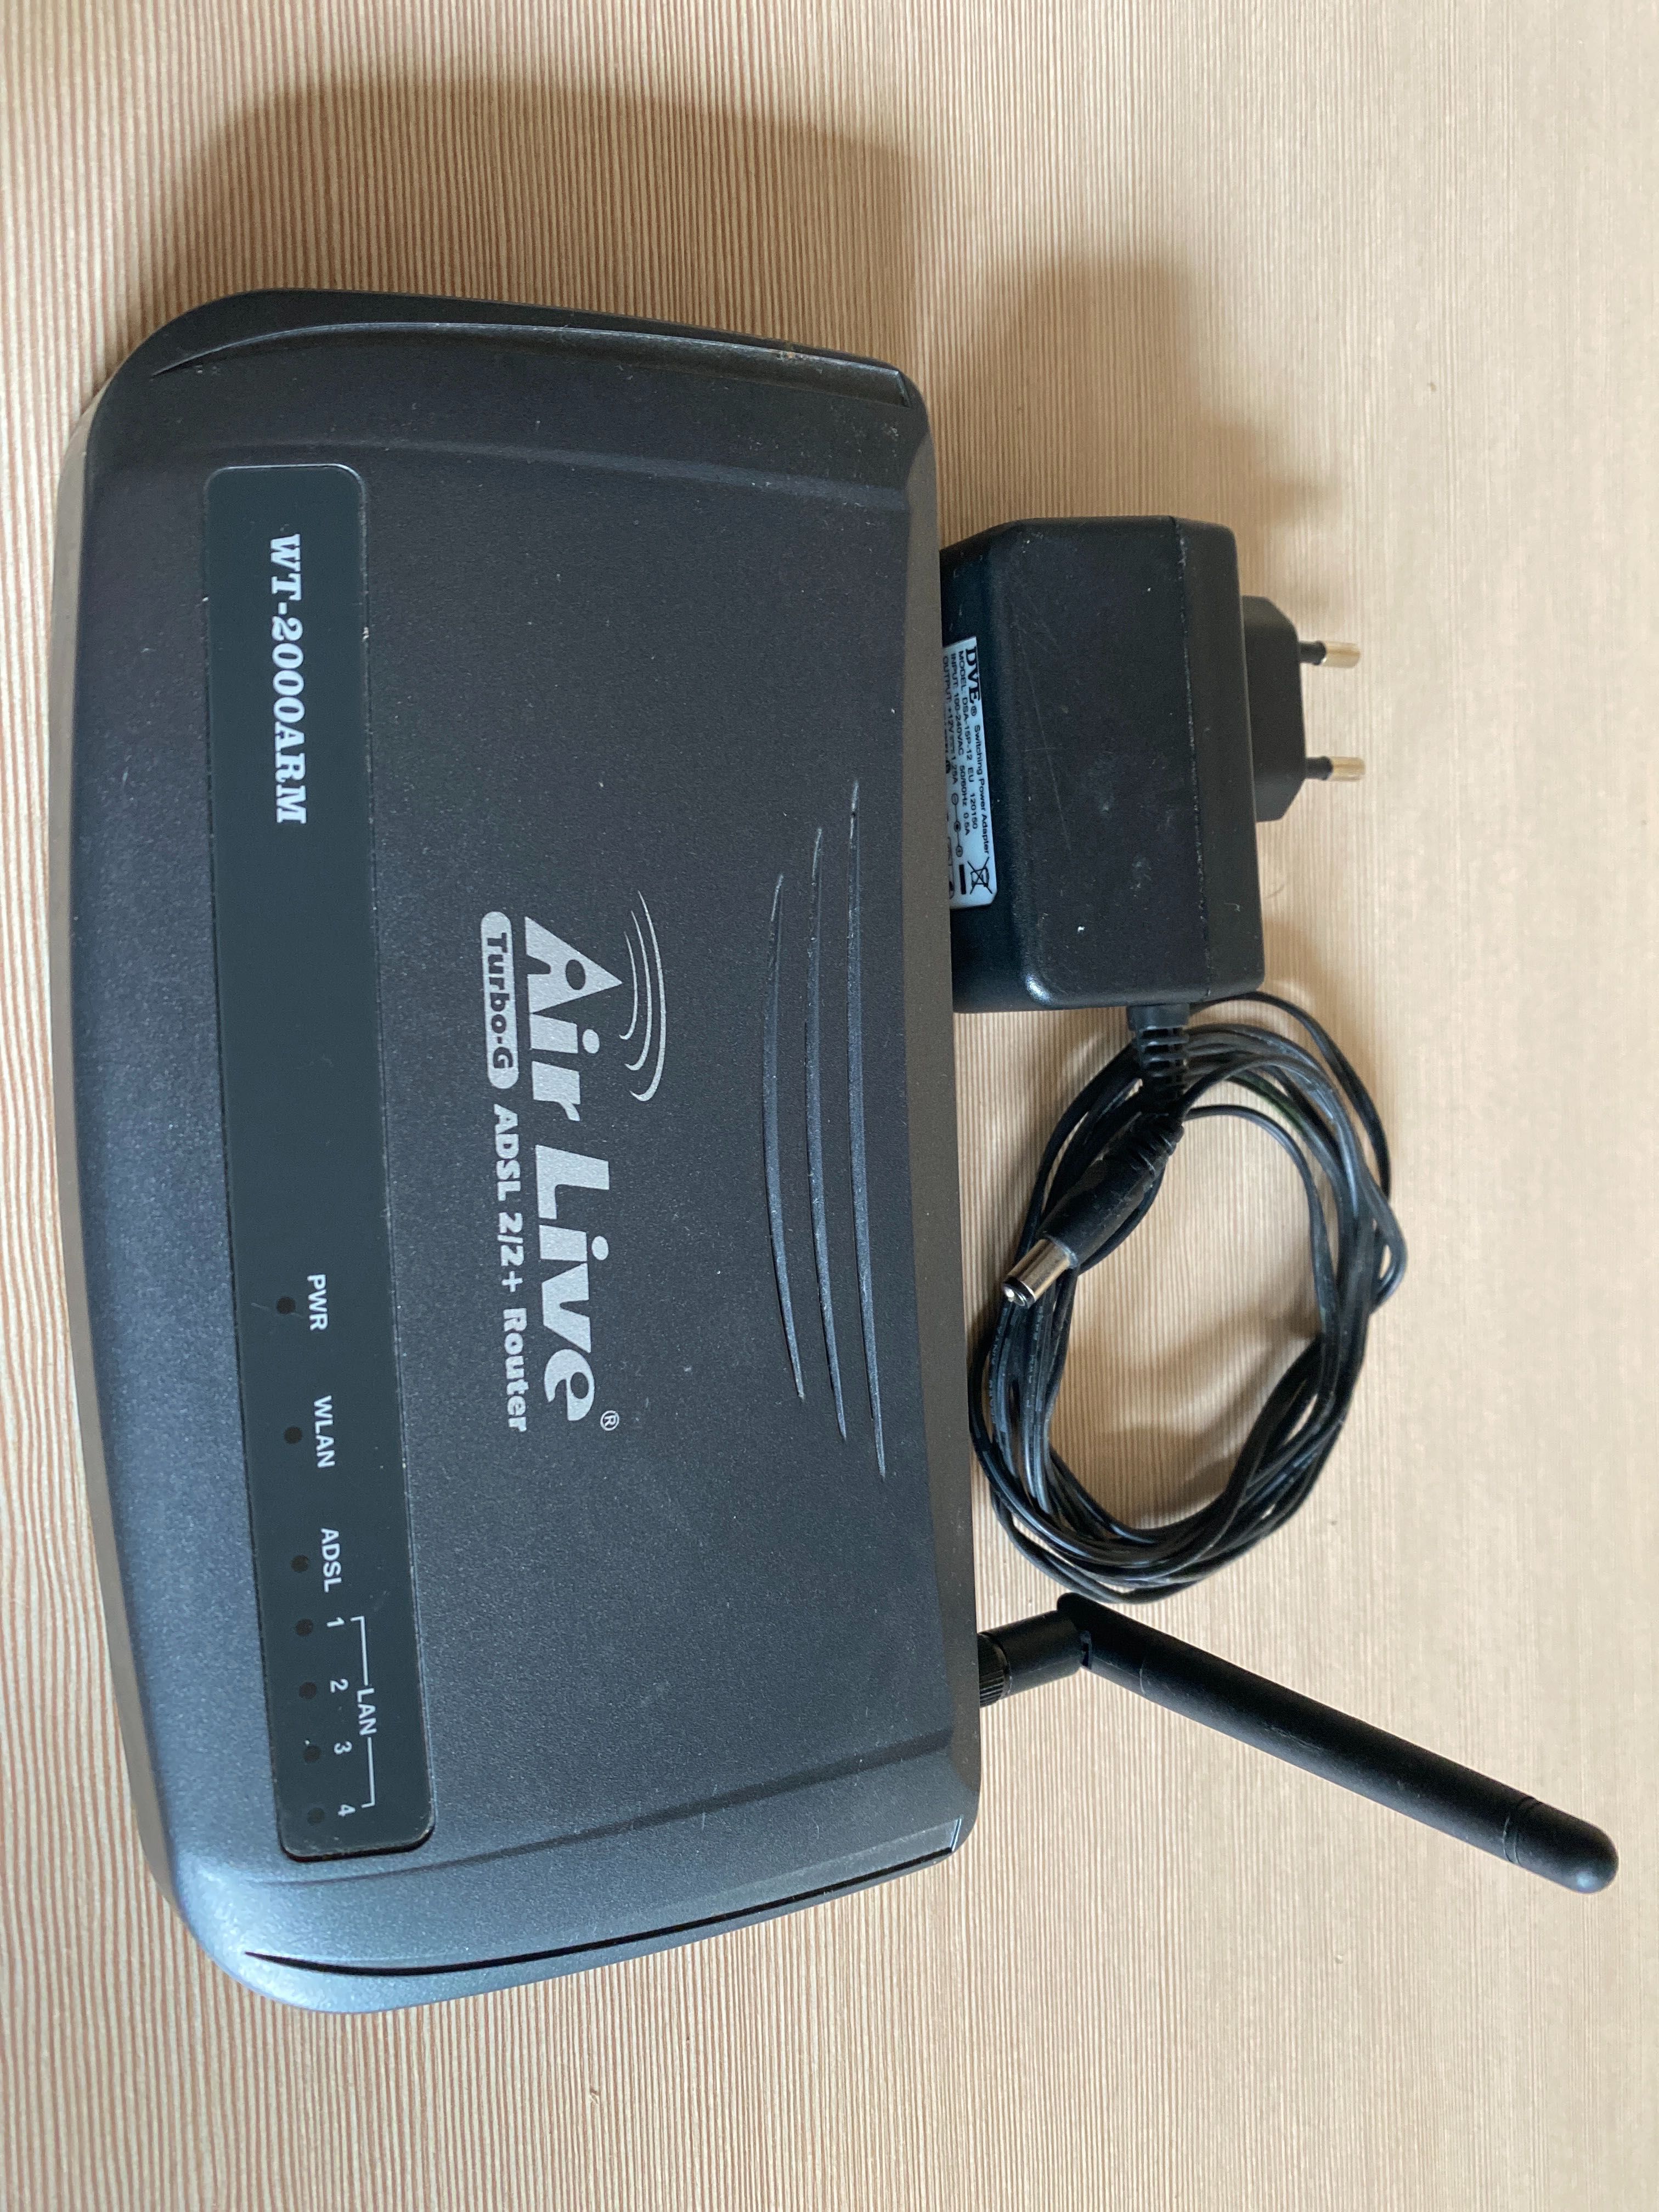 Router AirLive WT 2000ARM ADSL